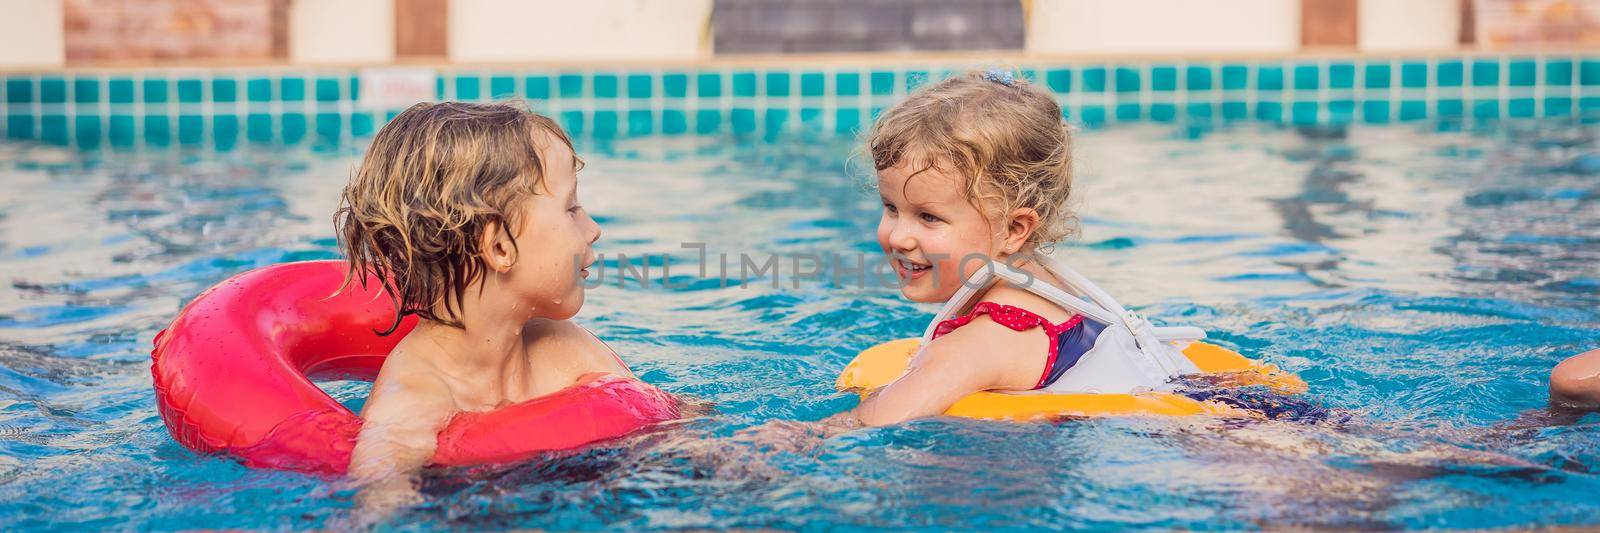 two little kids playing in the swimming pool BANNER, LONG FORMAT by galitskaya